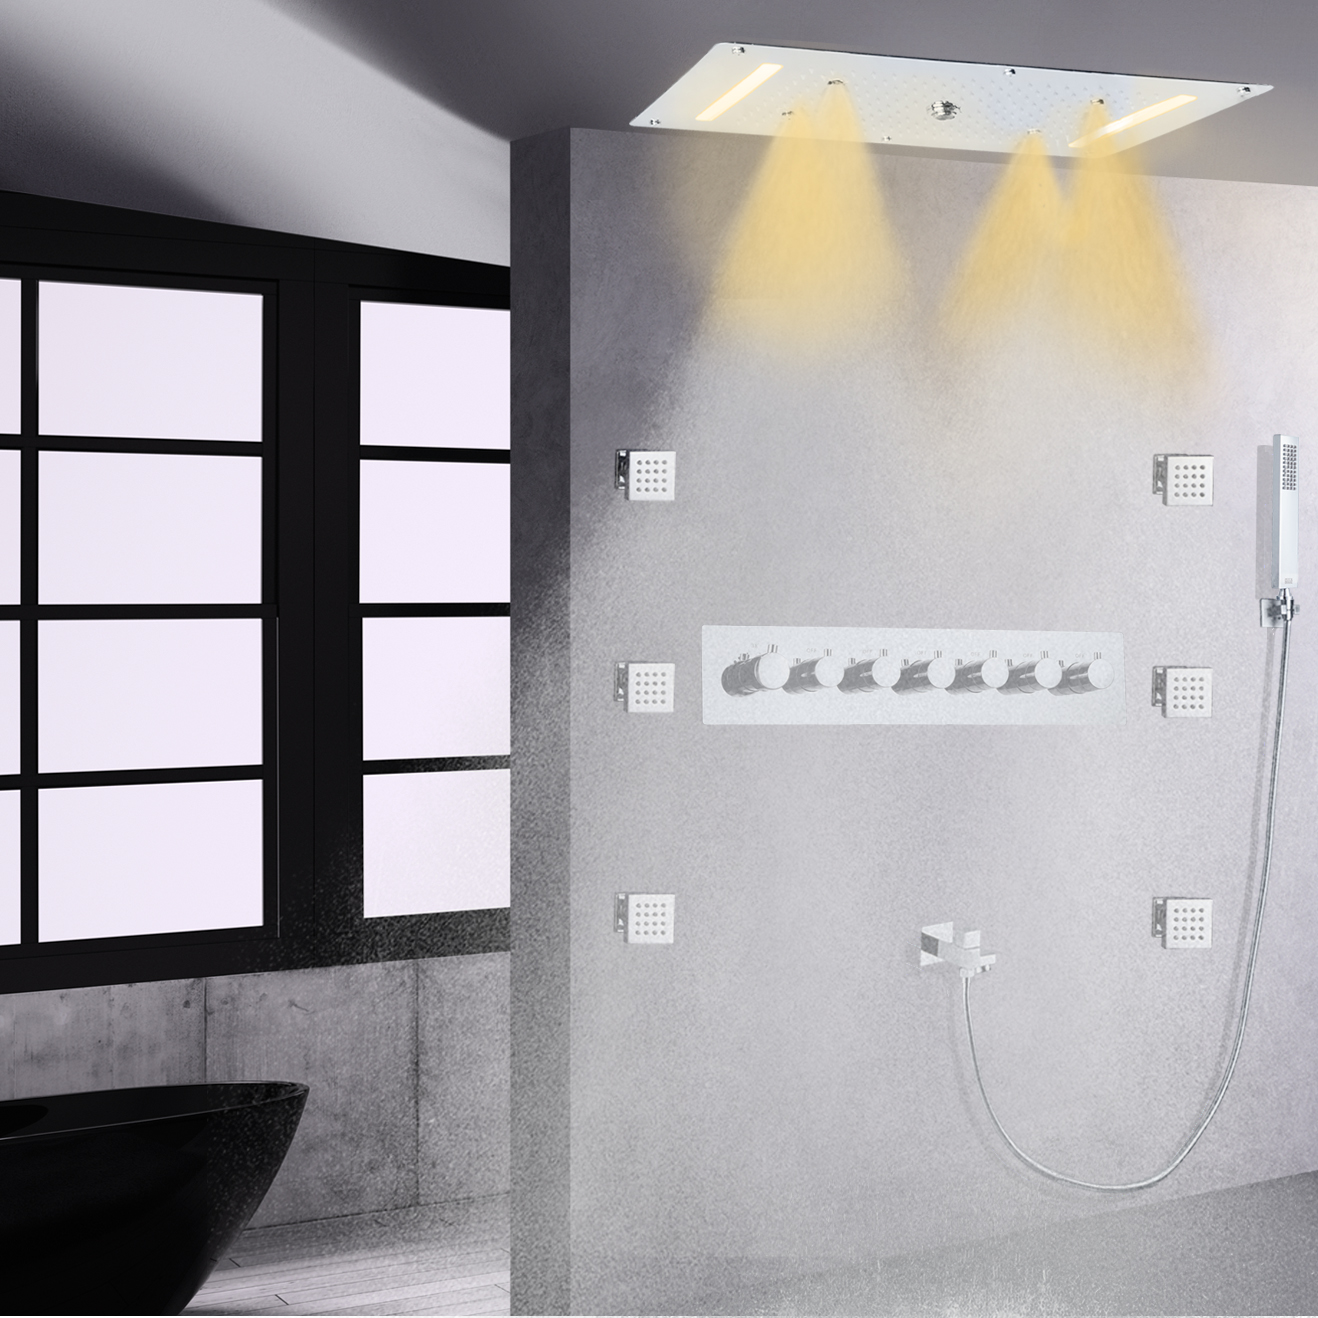 Chrome Polished LED Thermostatic Shower Mixer Bathroom Shower System Waterfall Rainfall Handheld Body Jet Spa